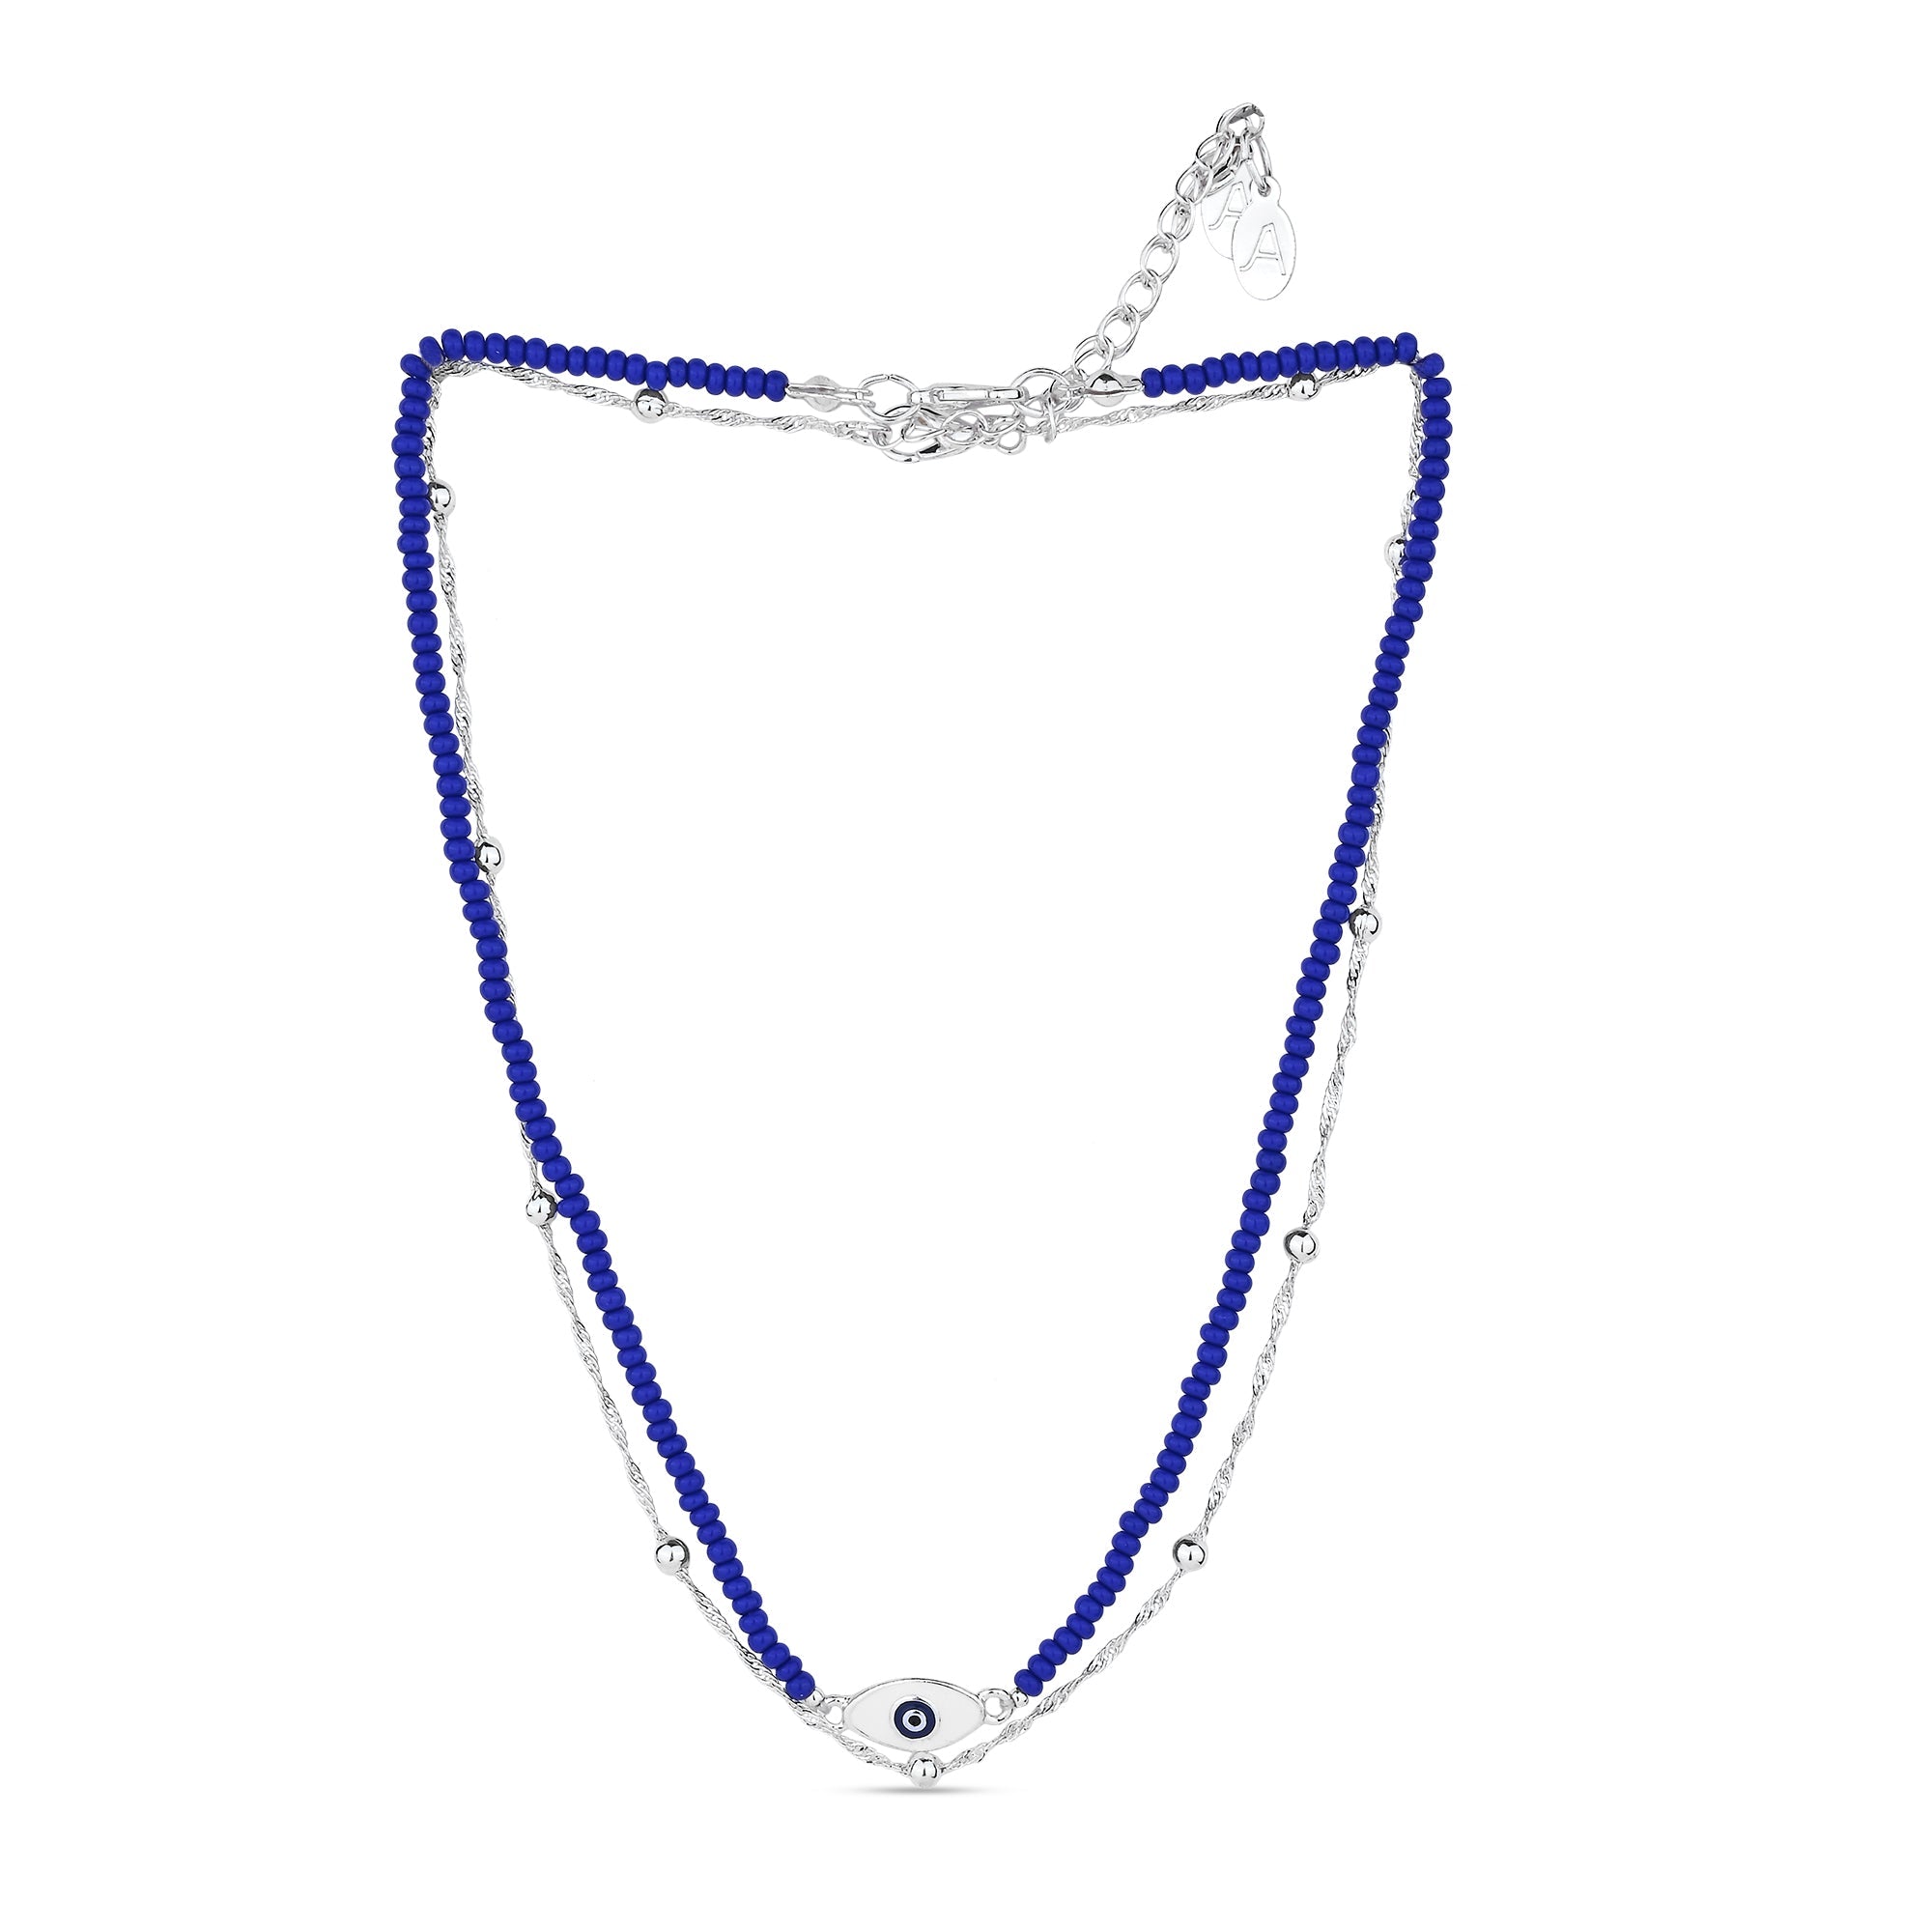 Accessorize London Women's Blue Beaded Evil Eye Twisted Chain Necklace